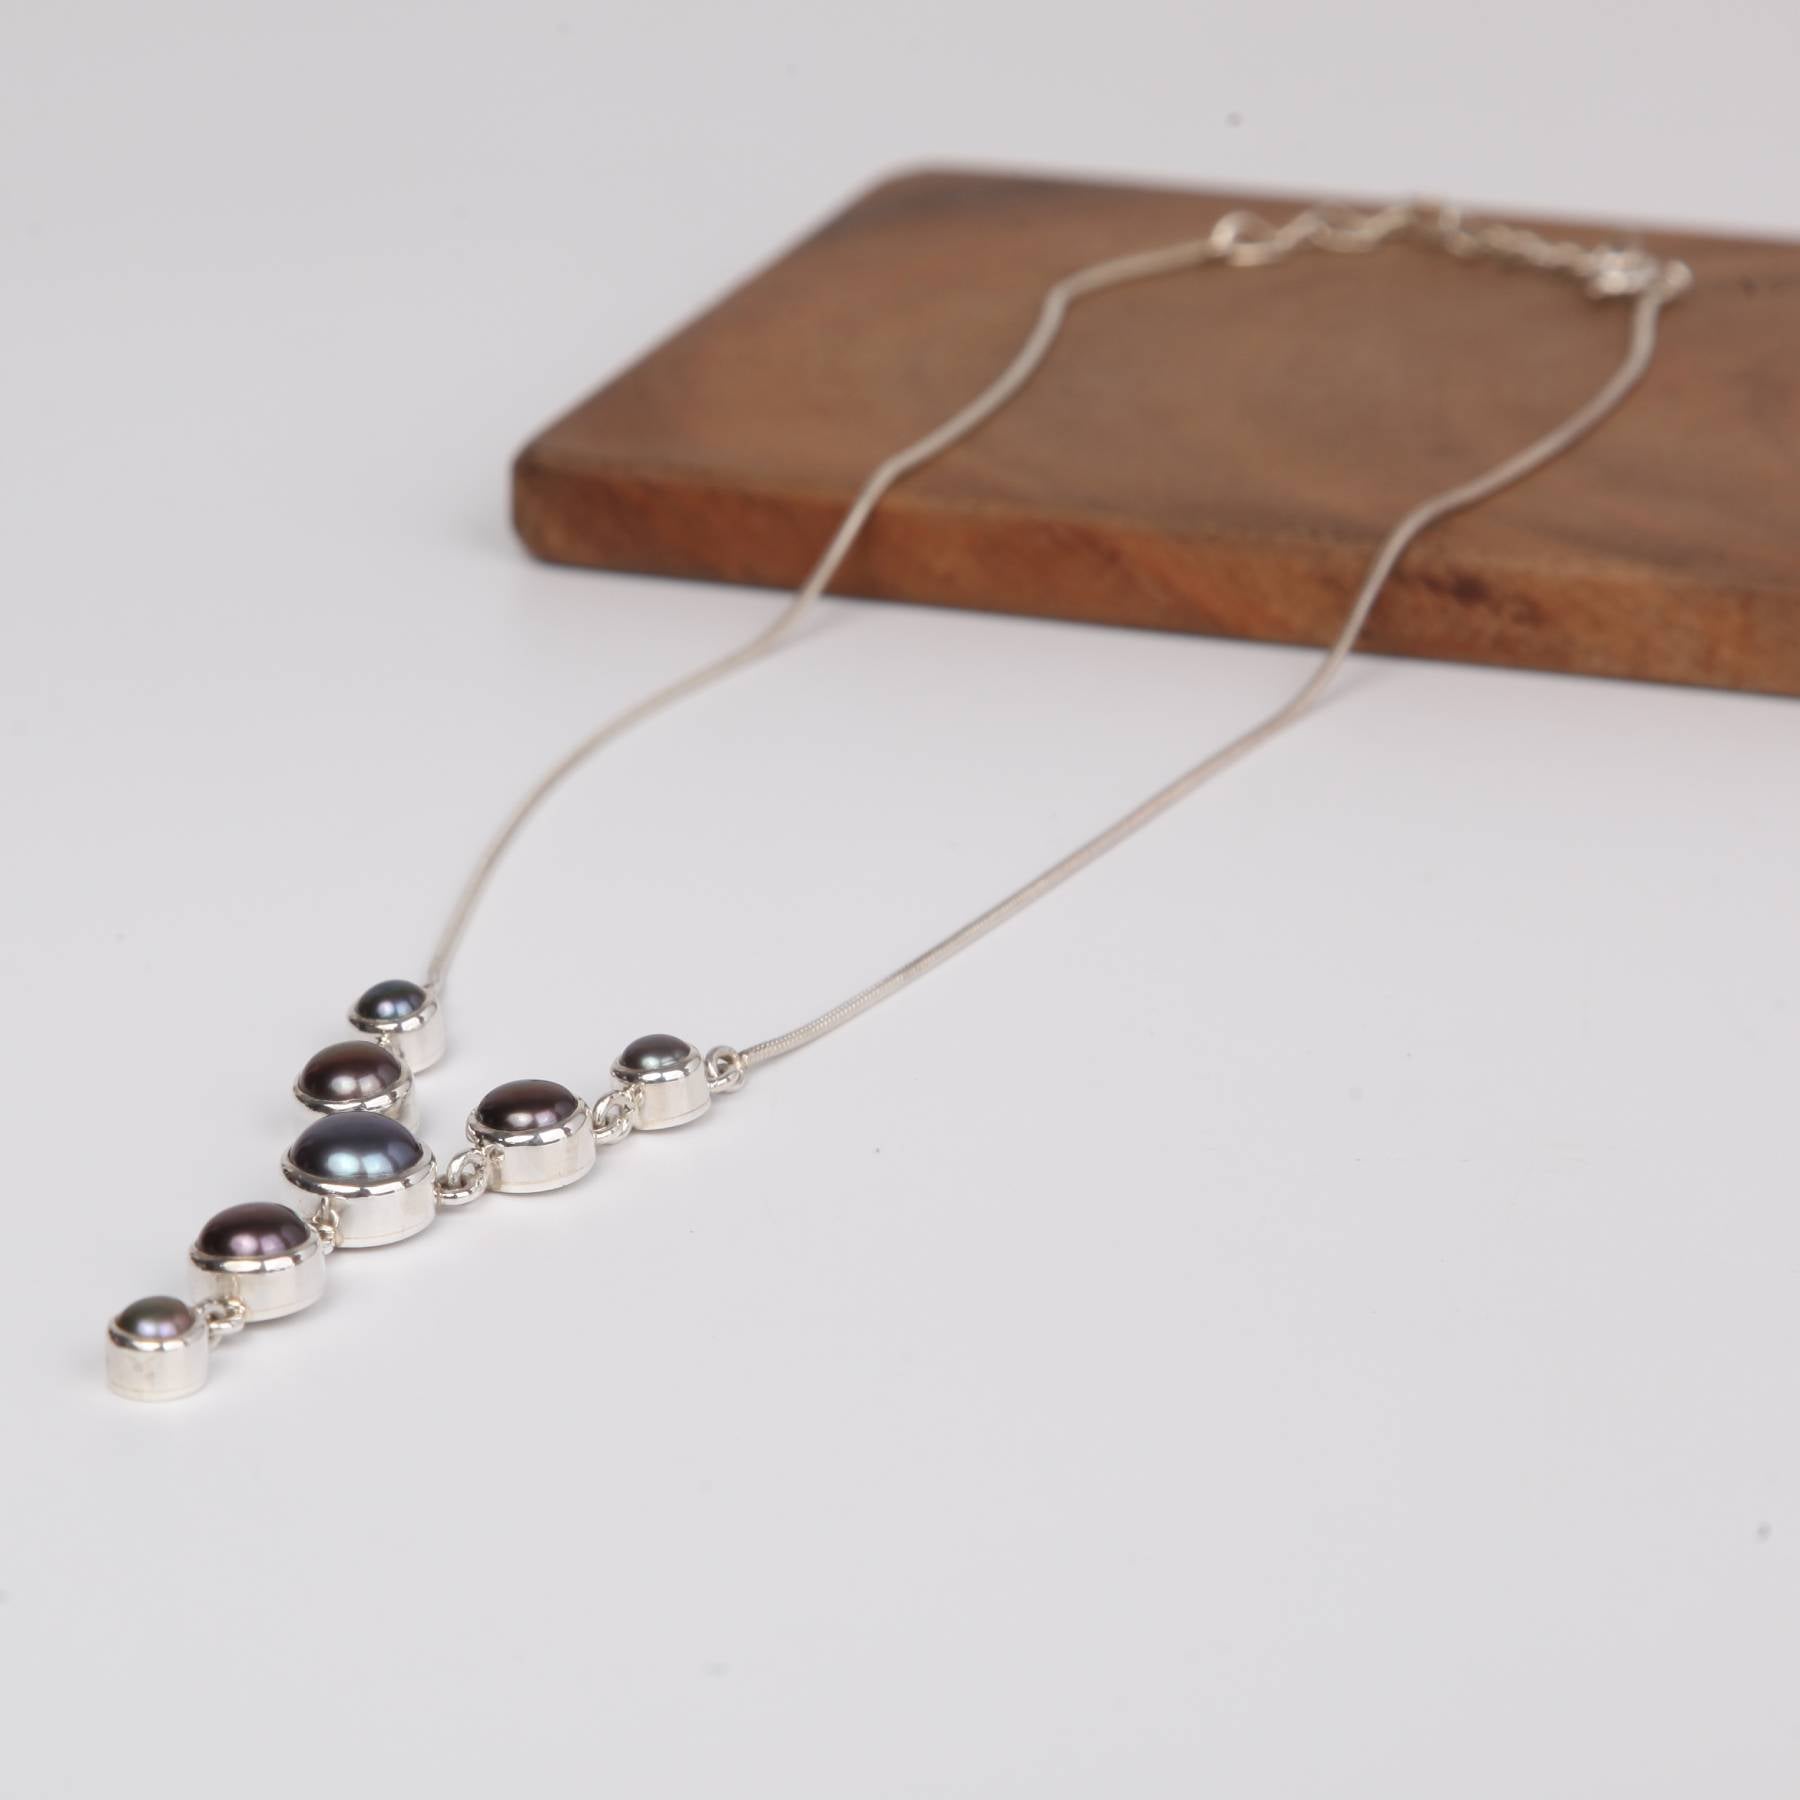 Dark Drop Down Sterling silver Necklace with Fresh Water Pearls